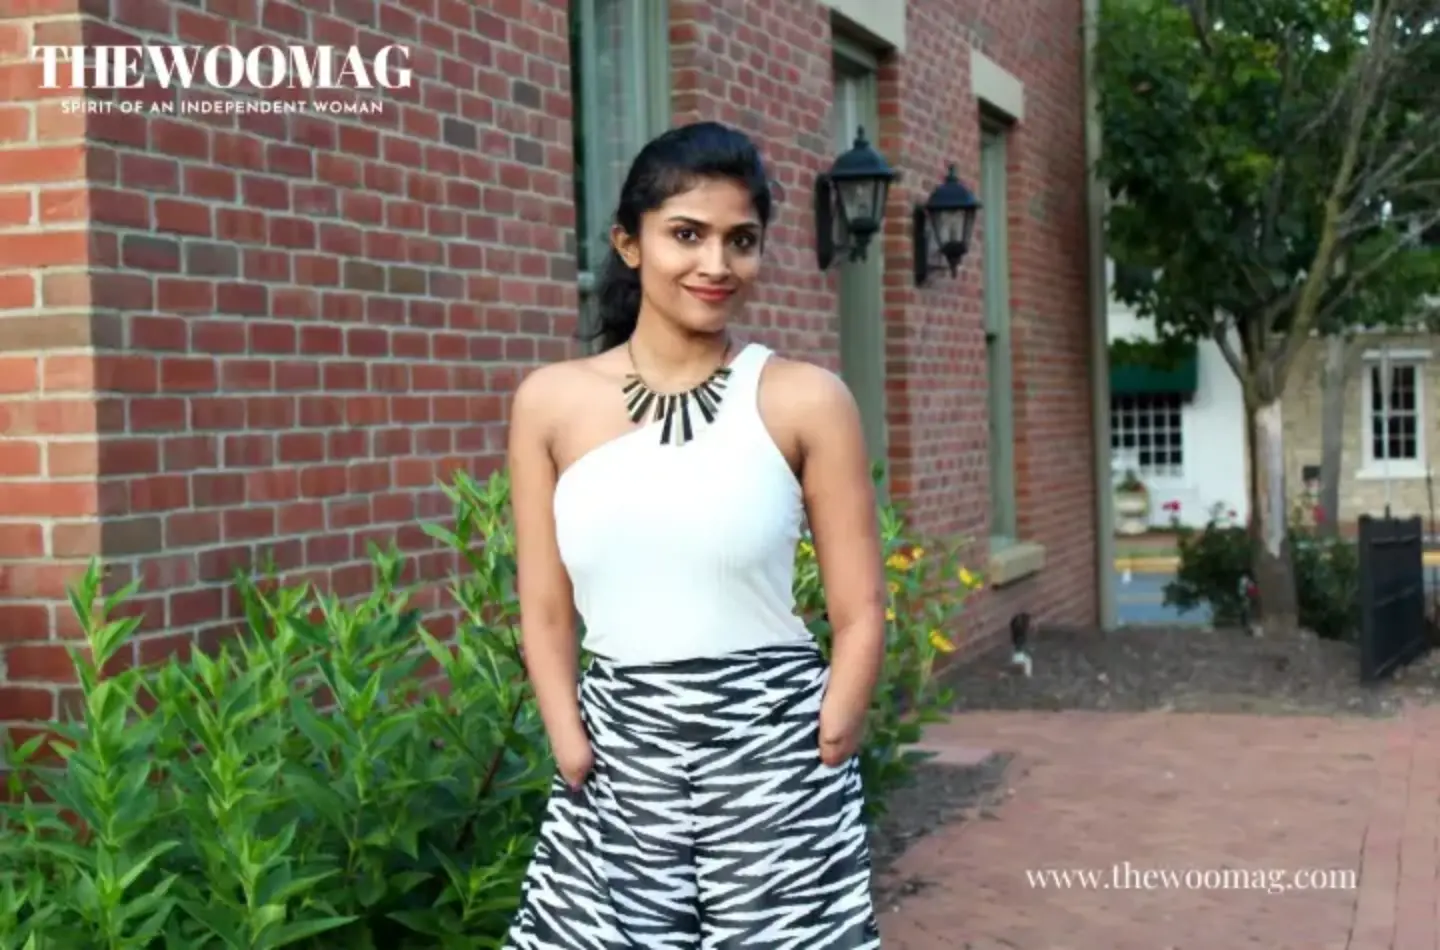 From Grenade to ted - The heartshatteing and yet Inspiring story of Malavika Iyer